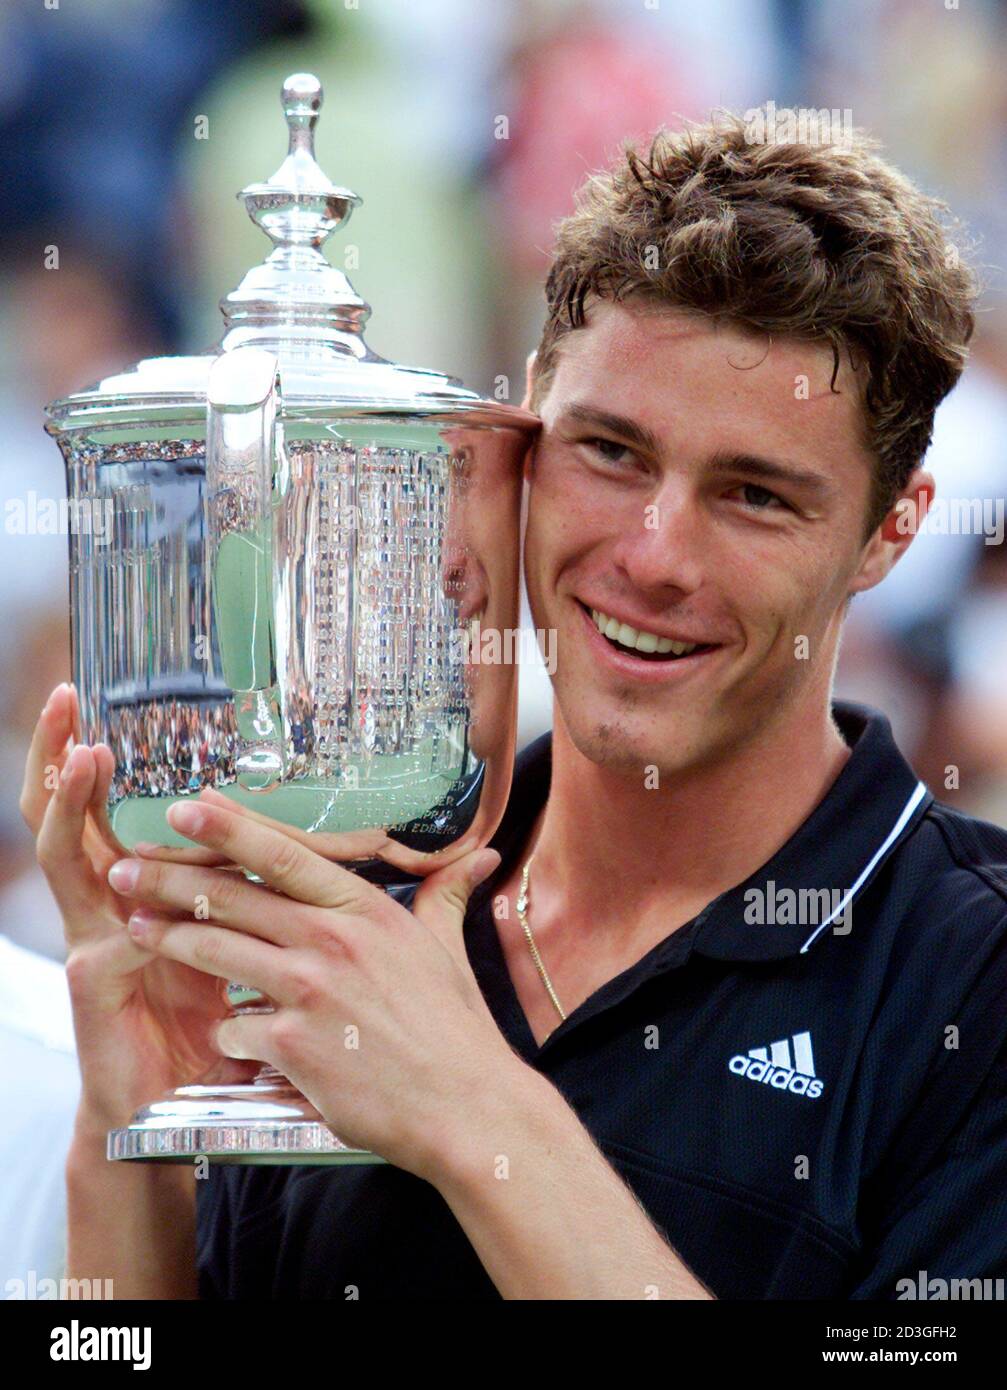 Russia's Marat Safin holds the trophy following his victory over American  Pete Sampras during the finals of the U.S. Open in New York, September 10.  Safin won the match 6-4 6-3 6-3